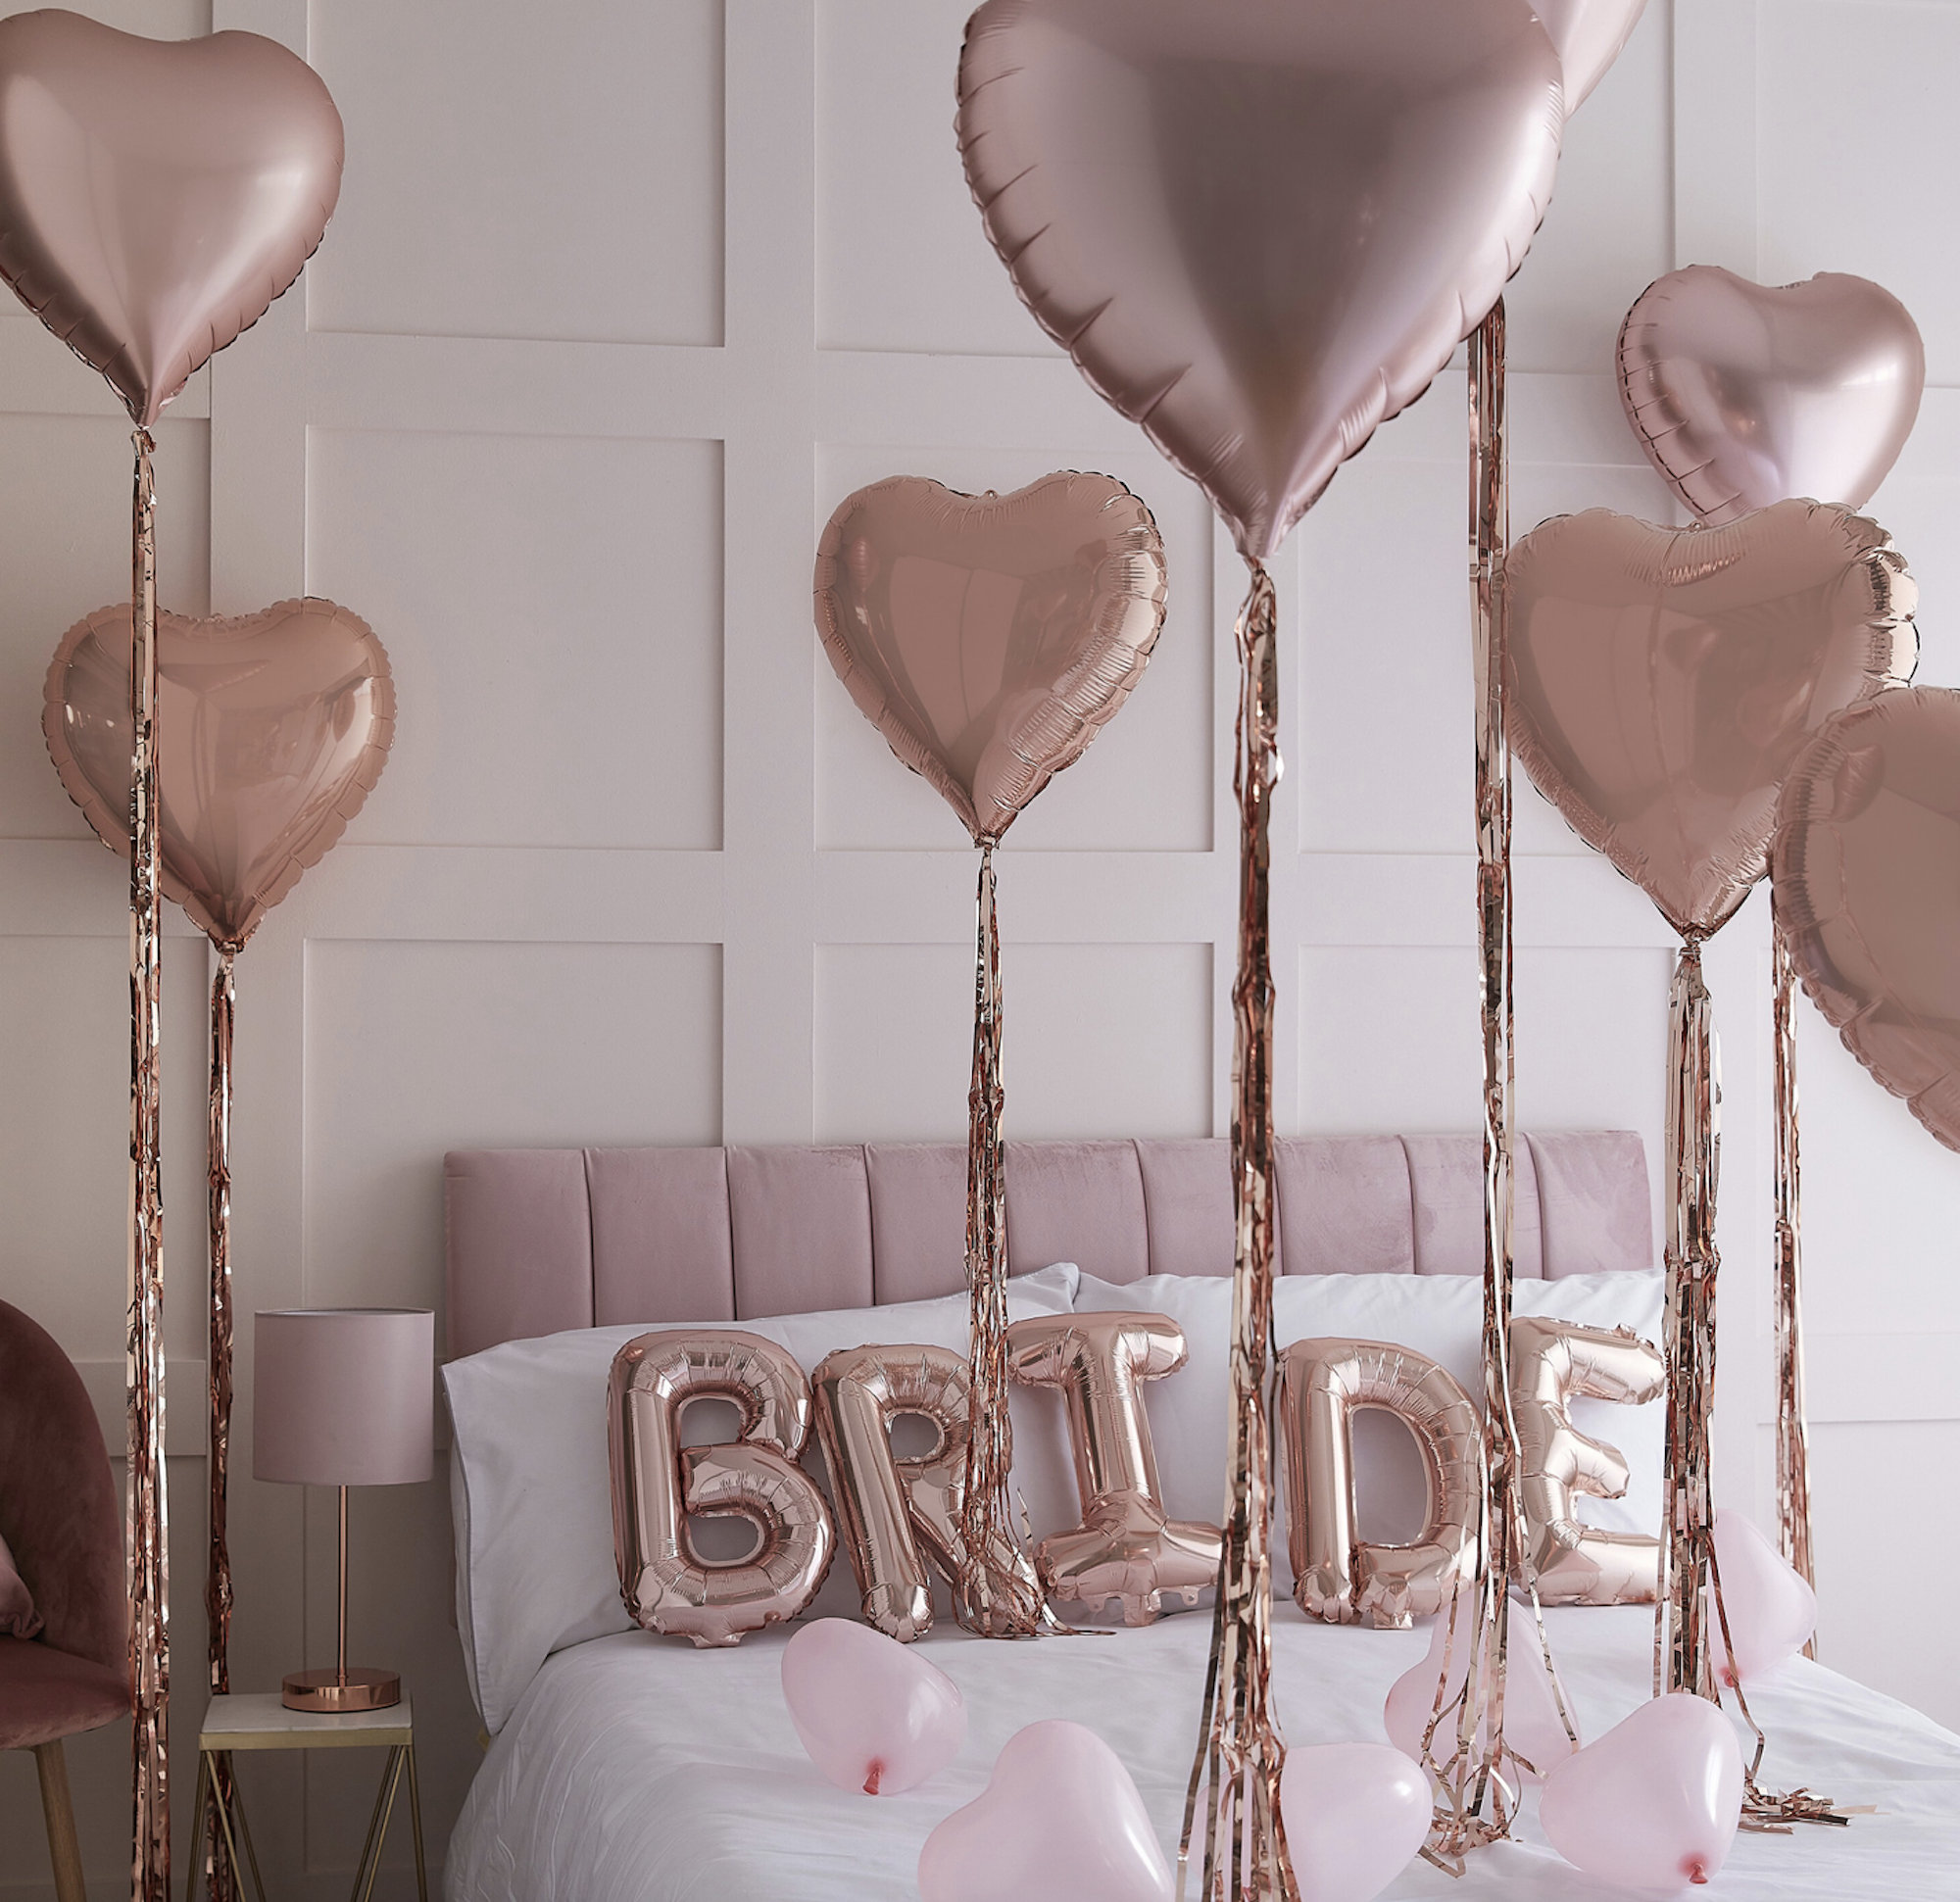 Rose Gold Bride and Heart Balloons Kit Hen Party Decorations ...